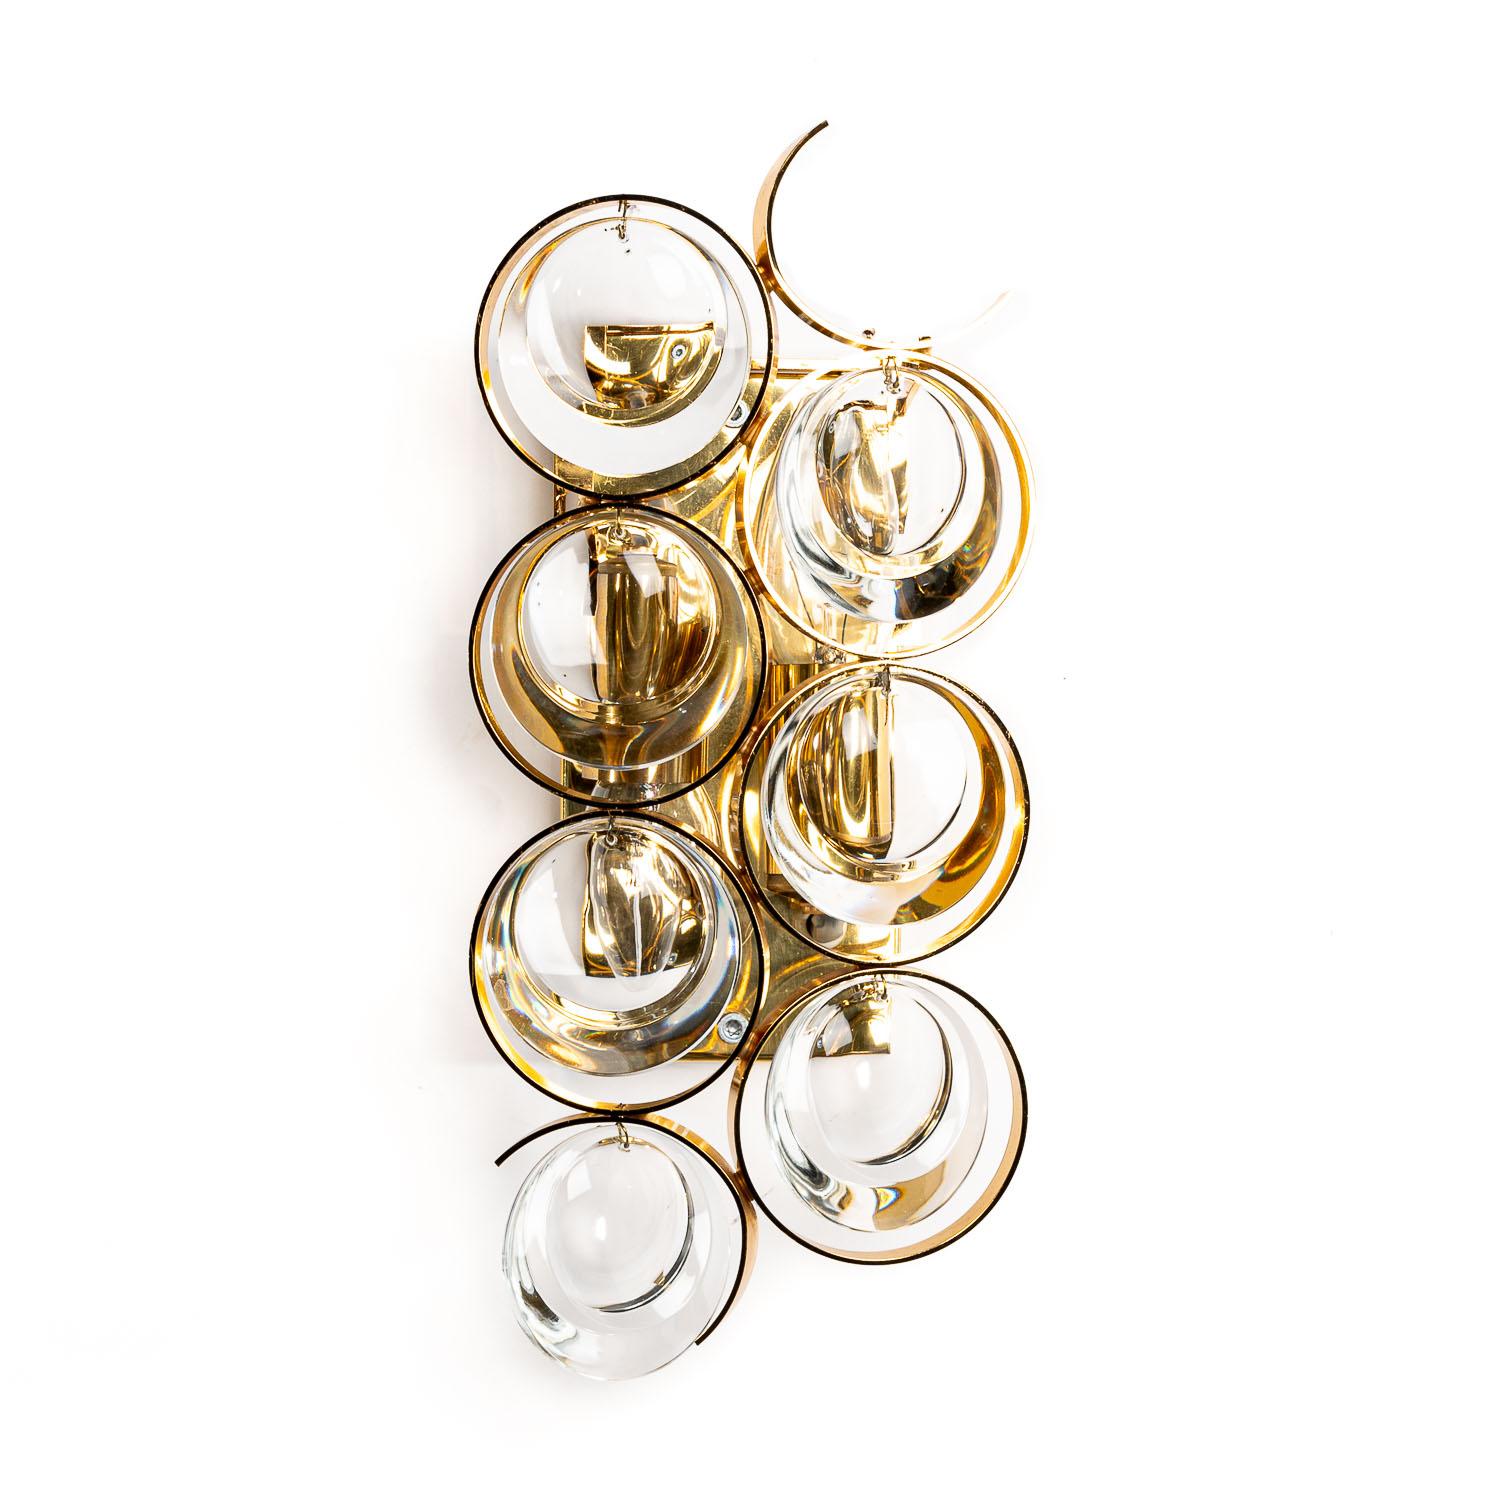 Lighting can be the statement piece of a room's design. These lights (4 units) are incredibly detailed in their appearance and catch the eye with their shimmering appearance. Circular glass droplets hang inside the brass frame, creating a stunning